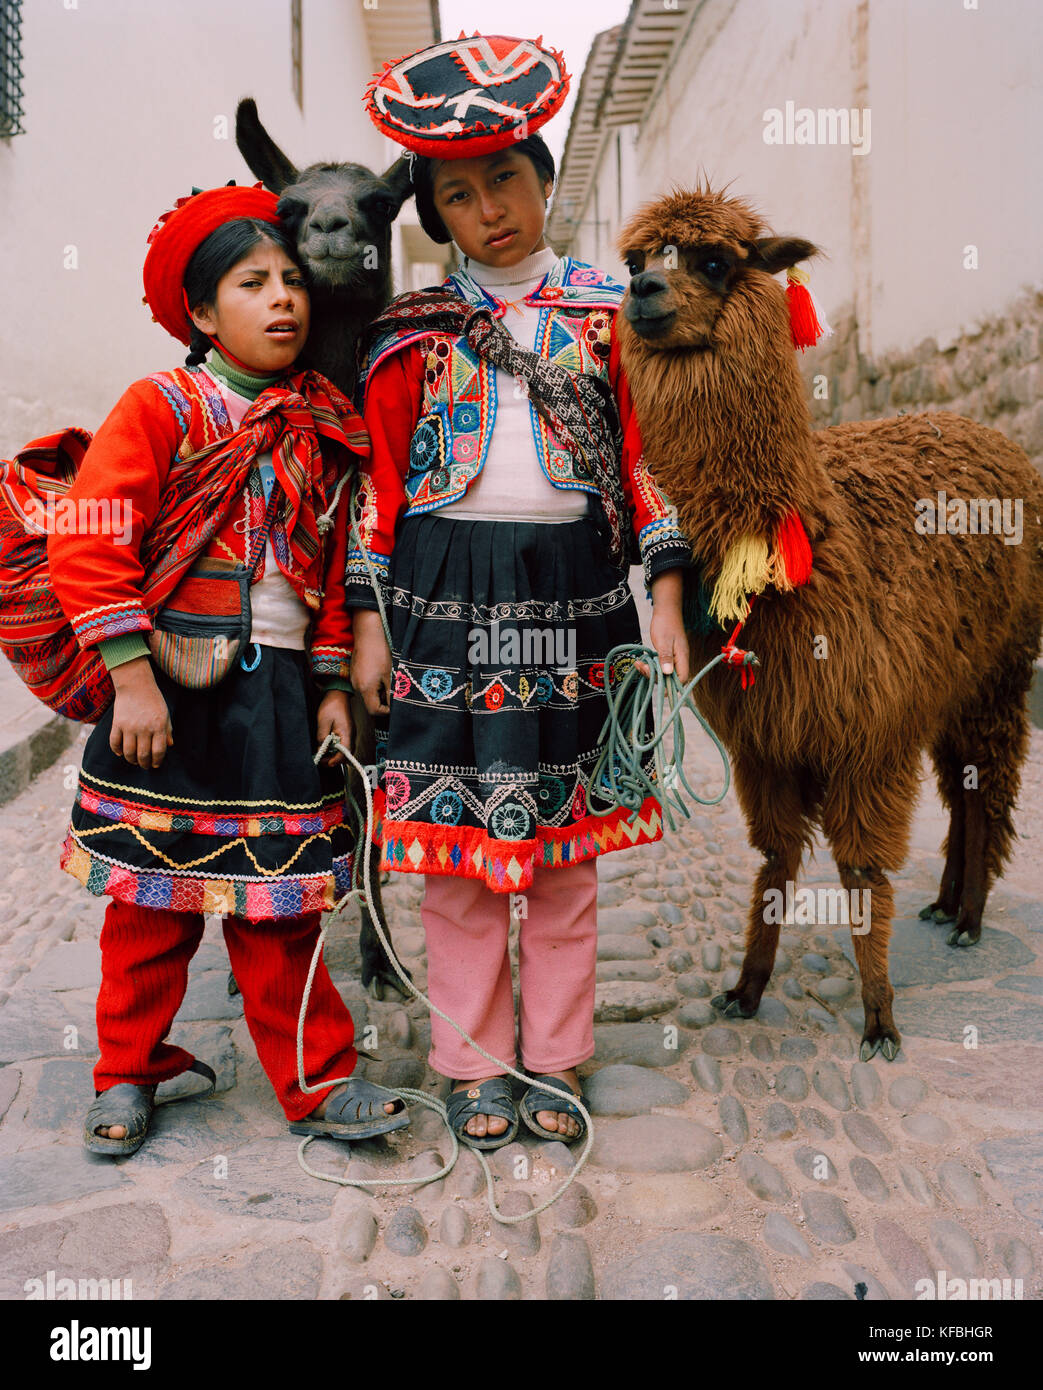 PERU, Cusco, South America, Latin America, girls wearing traditional clothing standing with Llama in a street in Cusco. Stock Photo